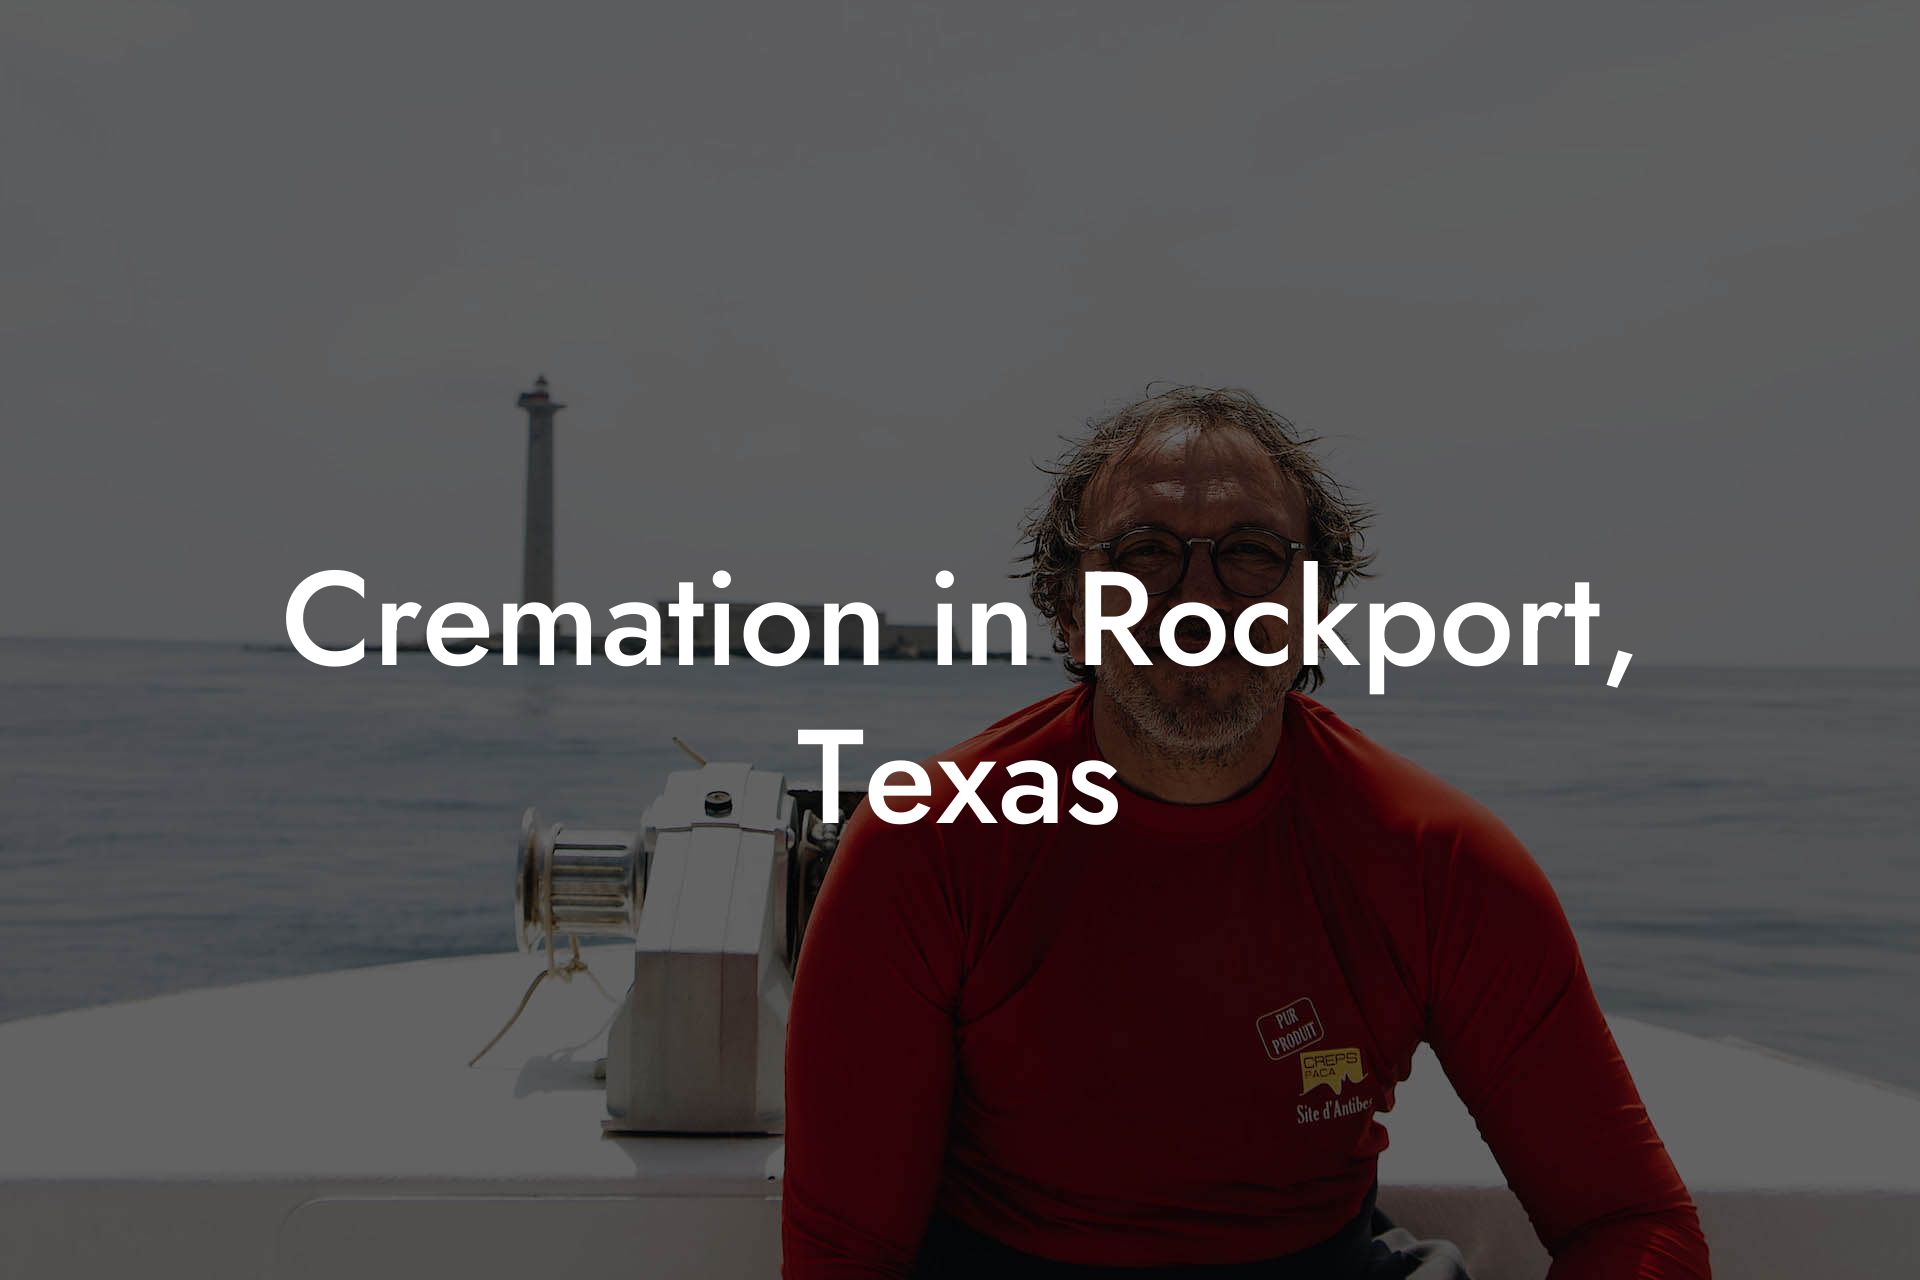 Cremation in Rockport, Texas